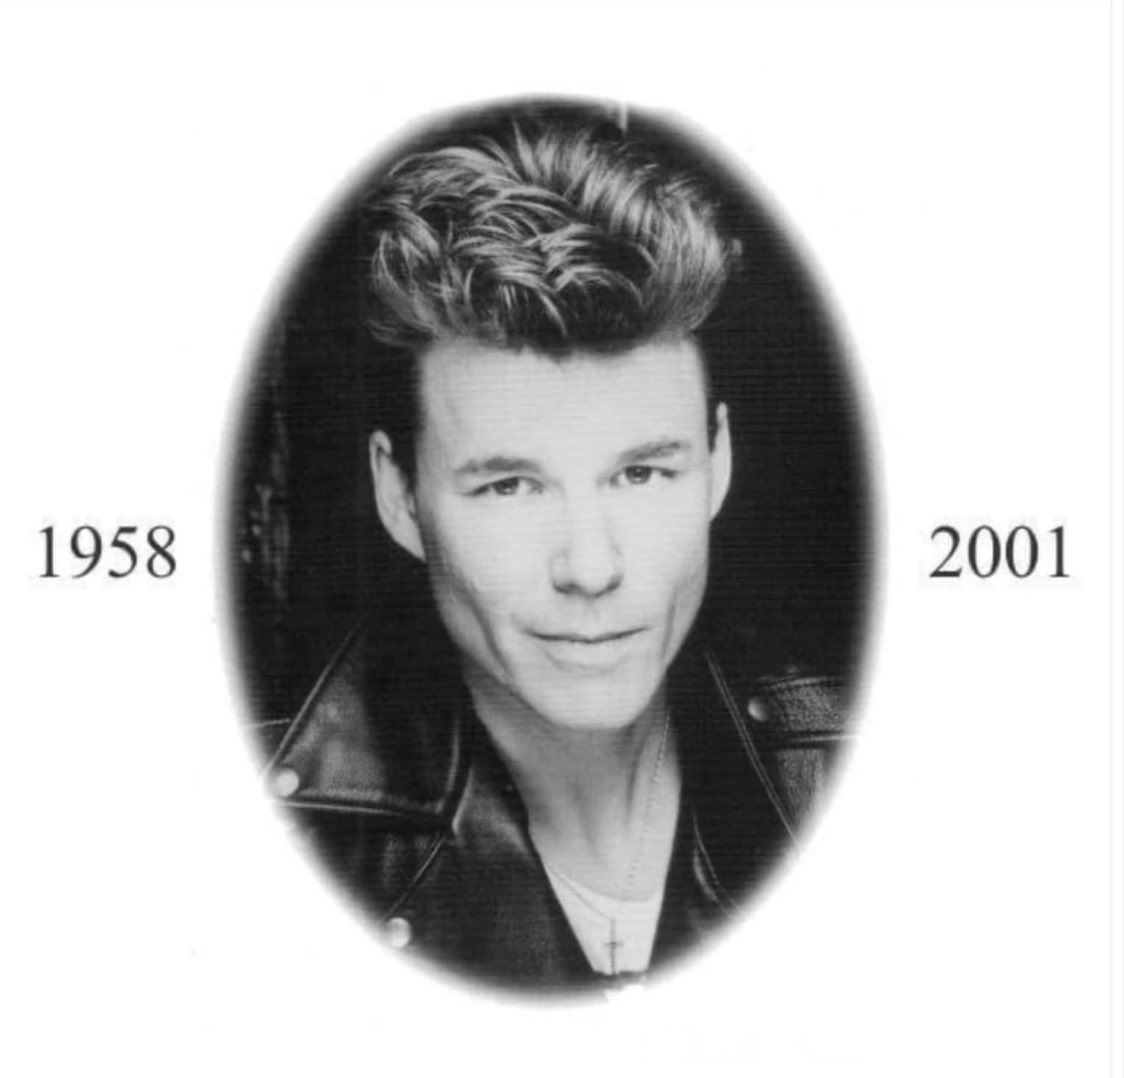 Can’t let today slip by without remembering the late great Stuart Adamson, who passed away on this day 2001 aged just 43. Very sadly missed 💔 #BigCountry #StuartAdamson